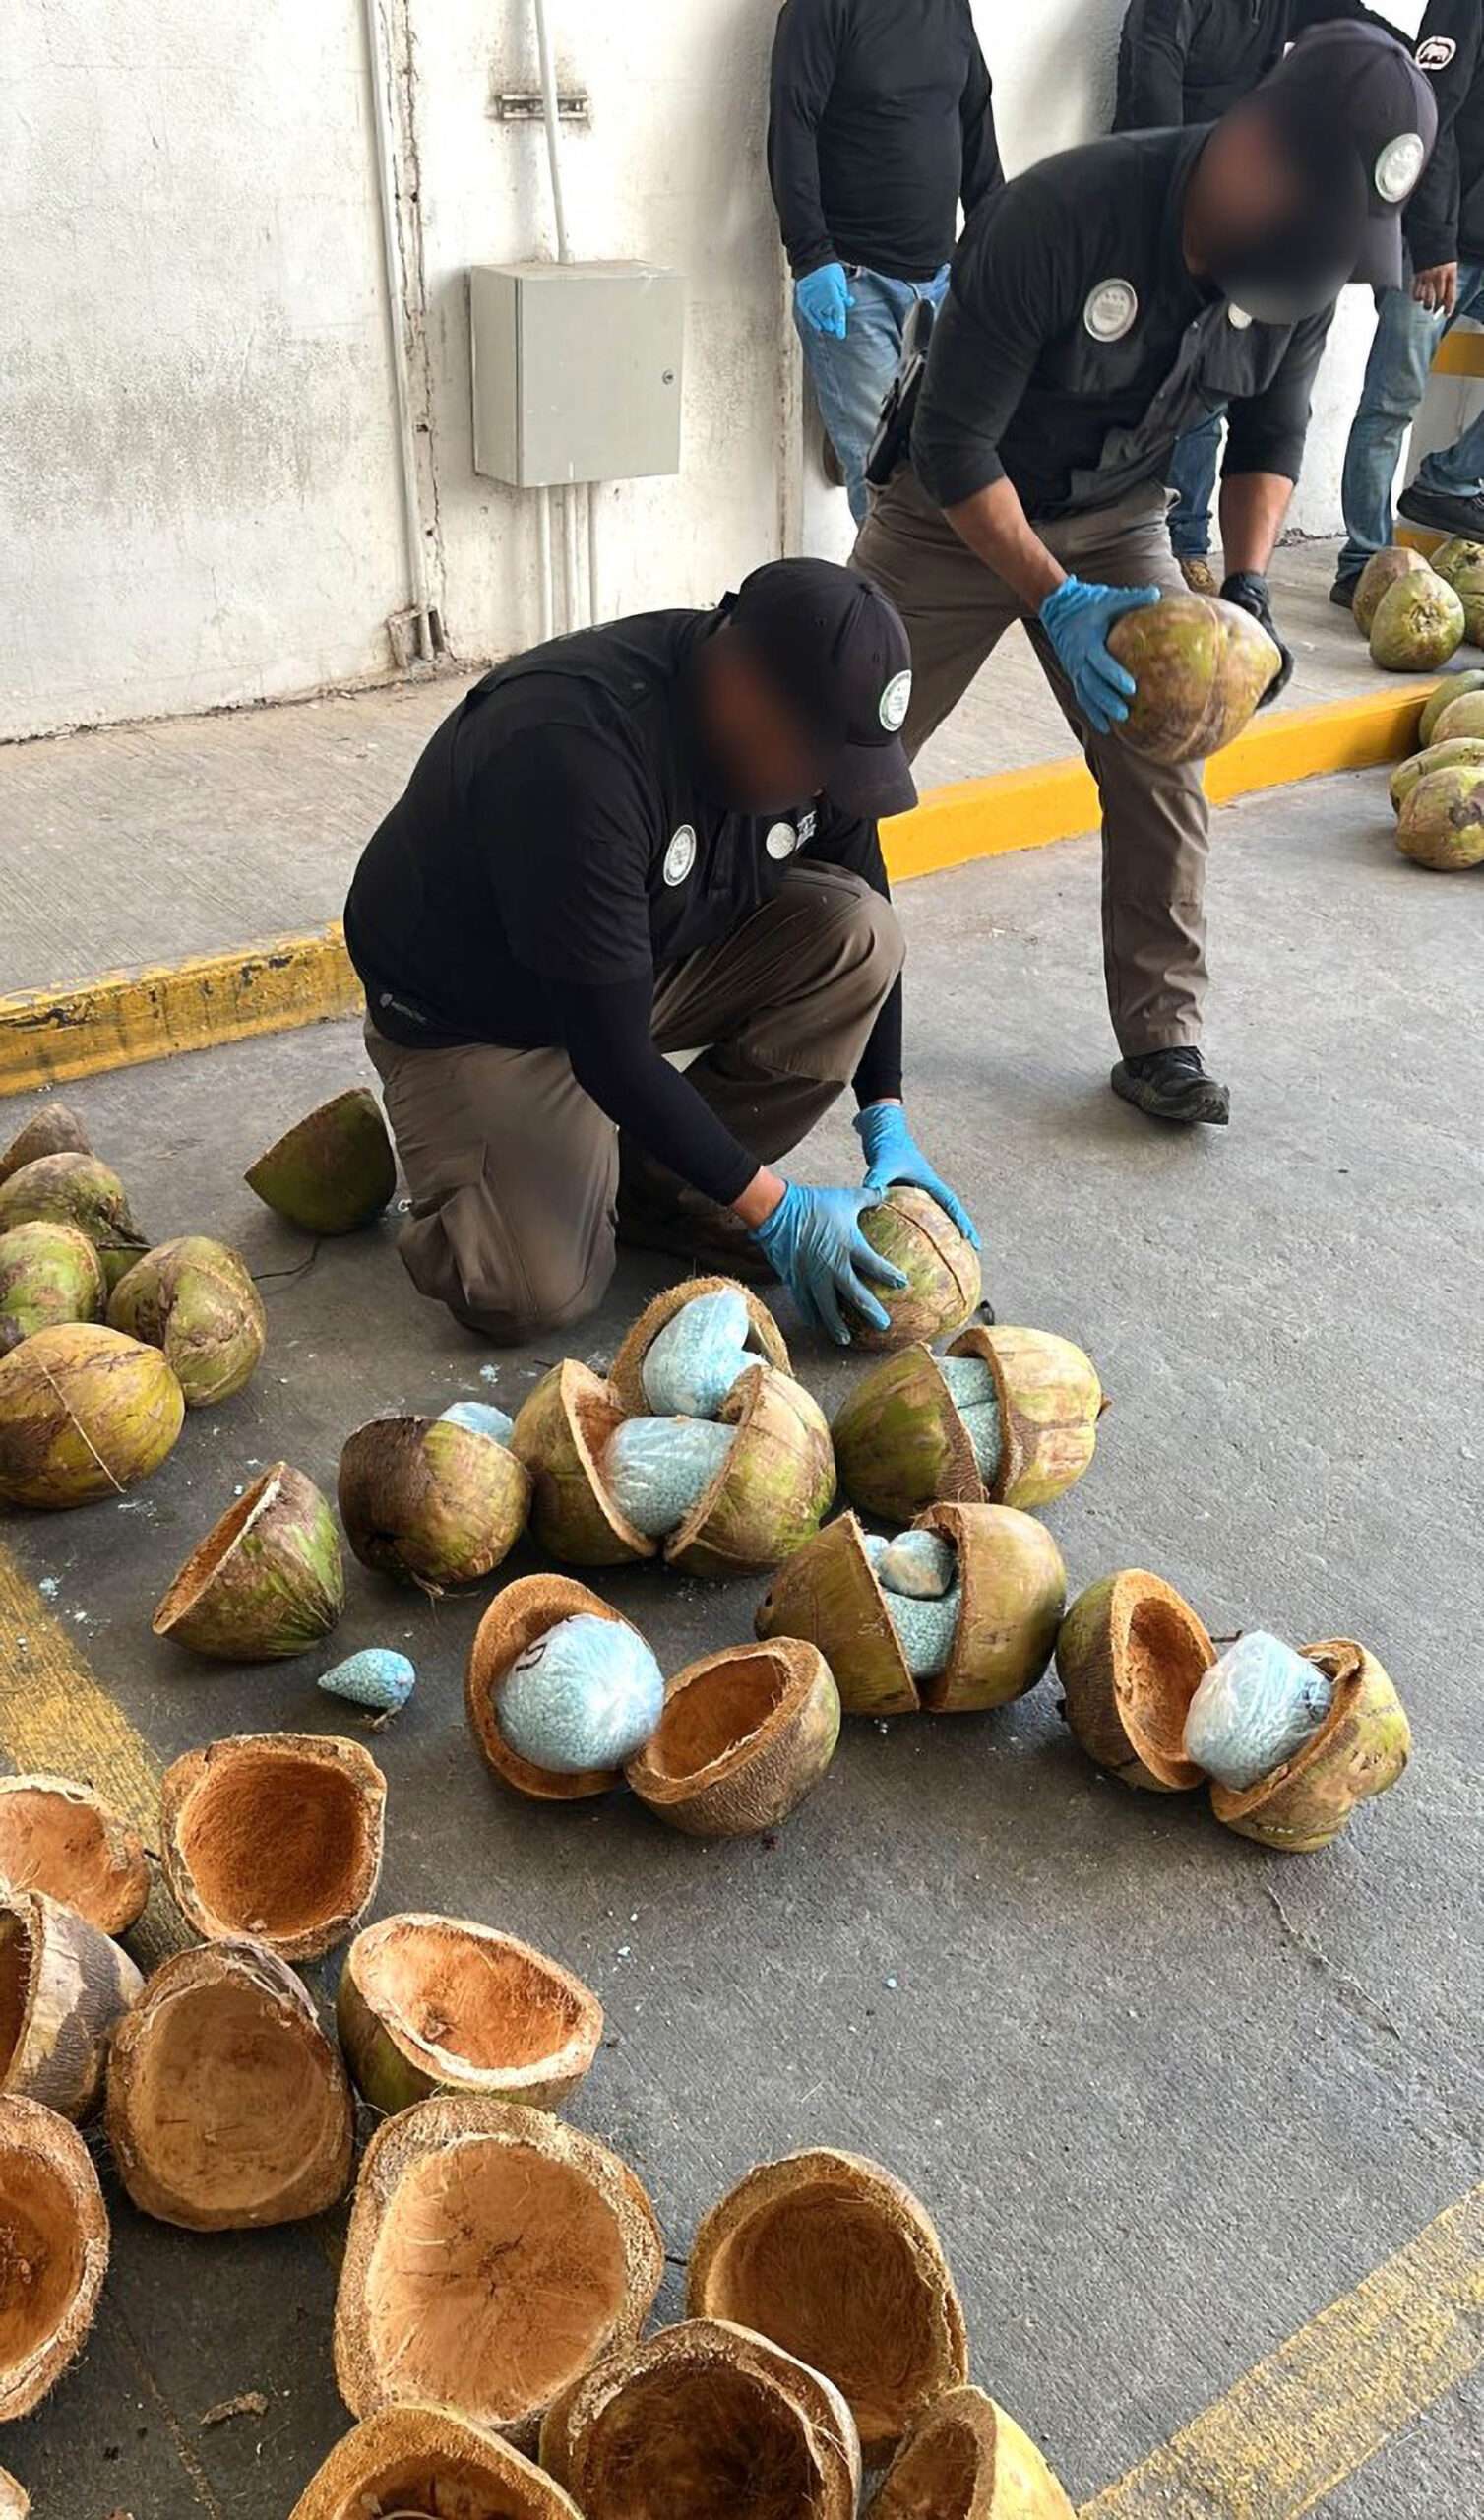 Read more about the article THAT’S NUTS: Officials In Mexico Seize Huge US-Bound Drugs Haul Hidden Inside Coconuts